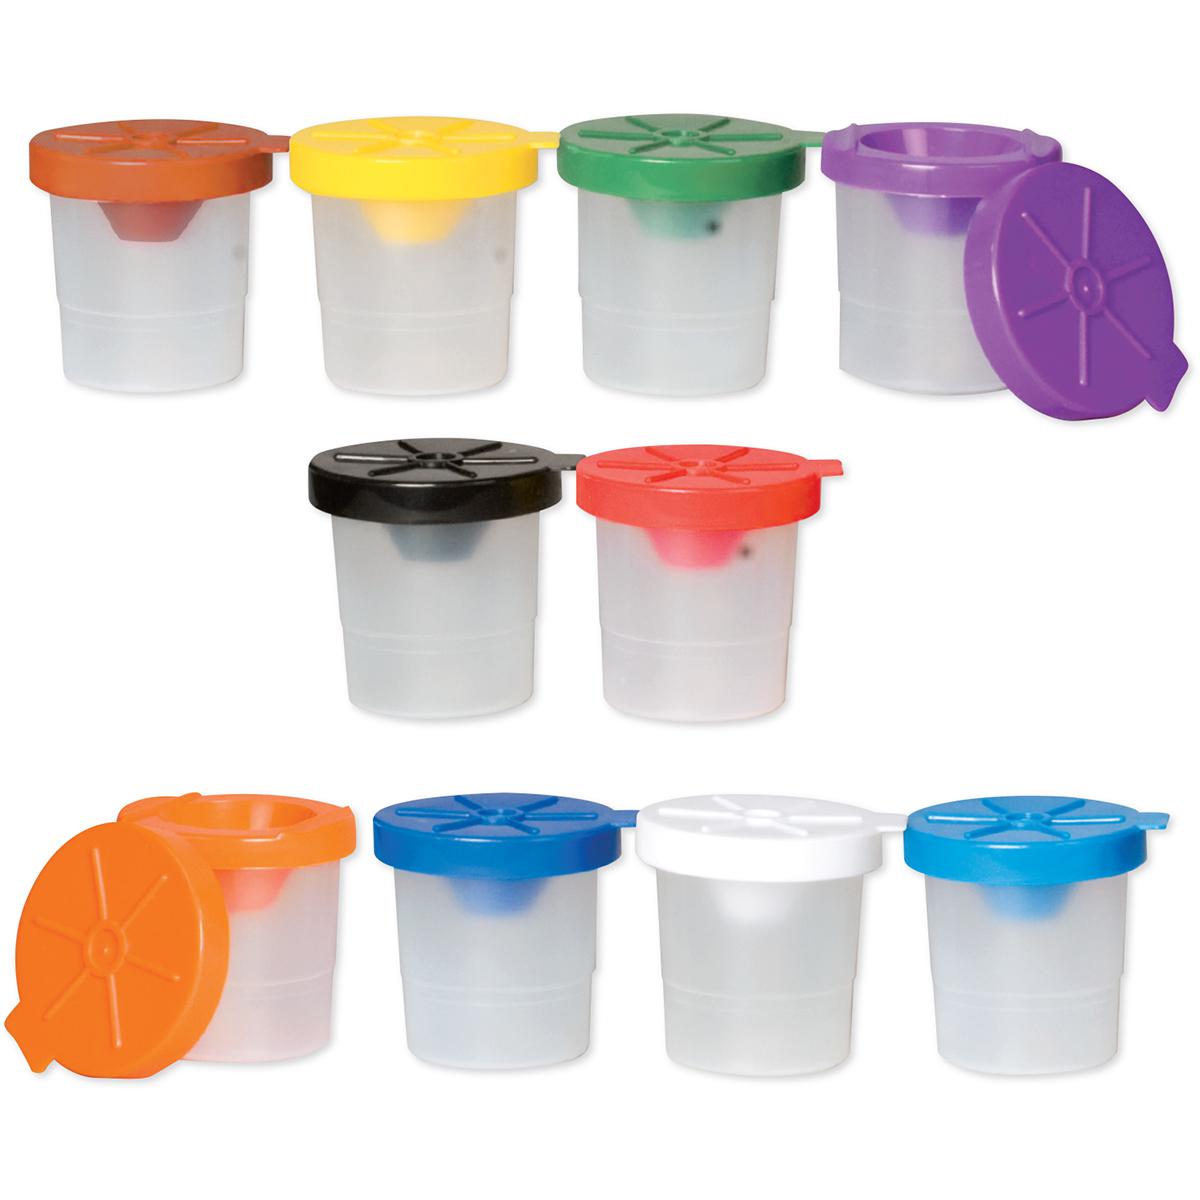  No-Spill Paint Cups 10-Pack 